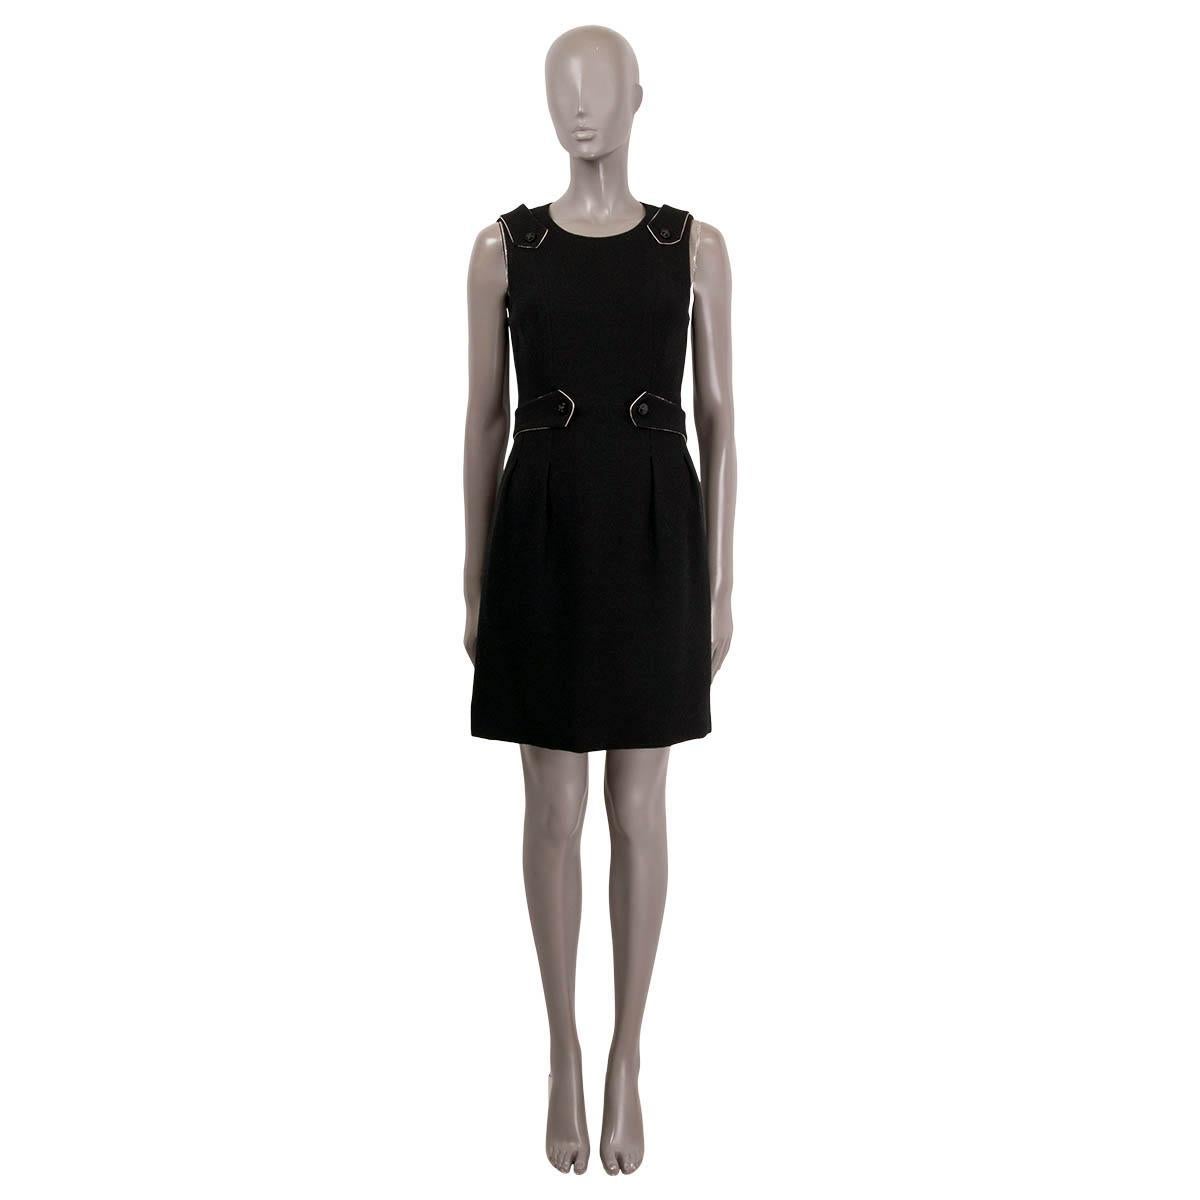 100% authentic Chanel 2006 Fall/Winter sleeveless dress in black wool (100%). Featuring belt straps at the waist and shoulders with crystal embellished cross buttons and box pleats at front. Opens with a zipper in the back and is lined in silk